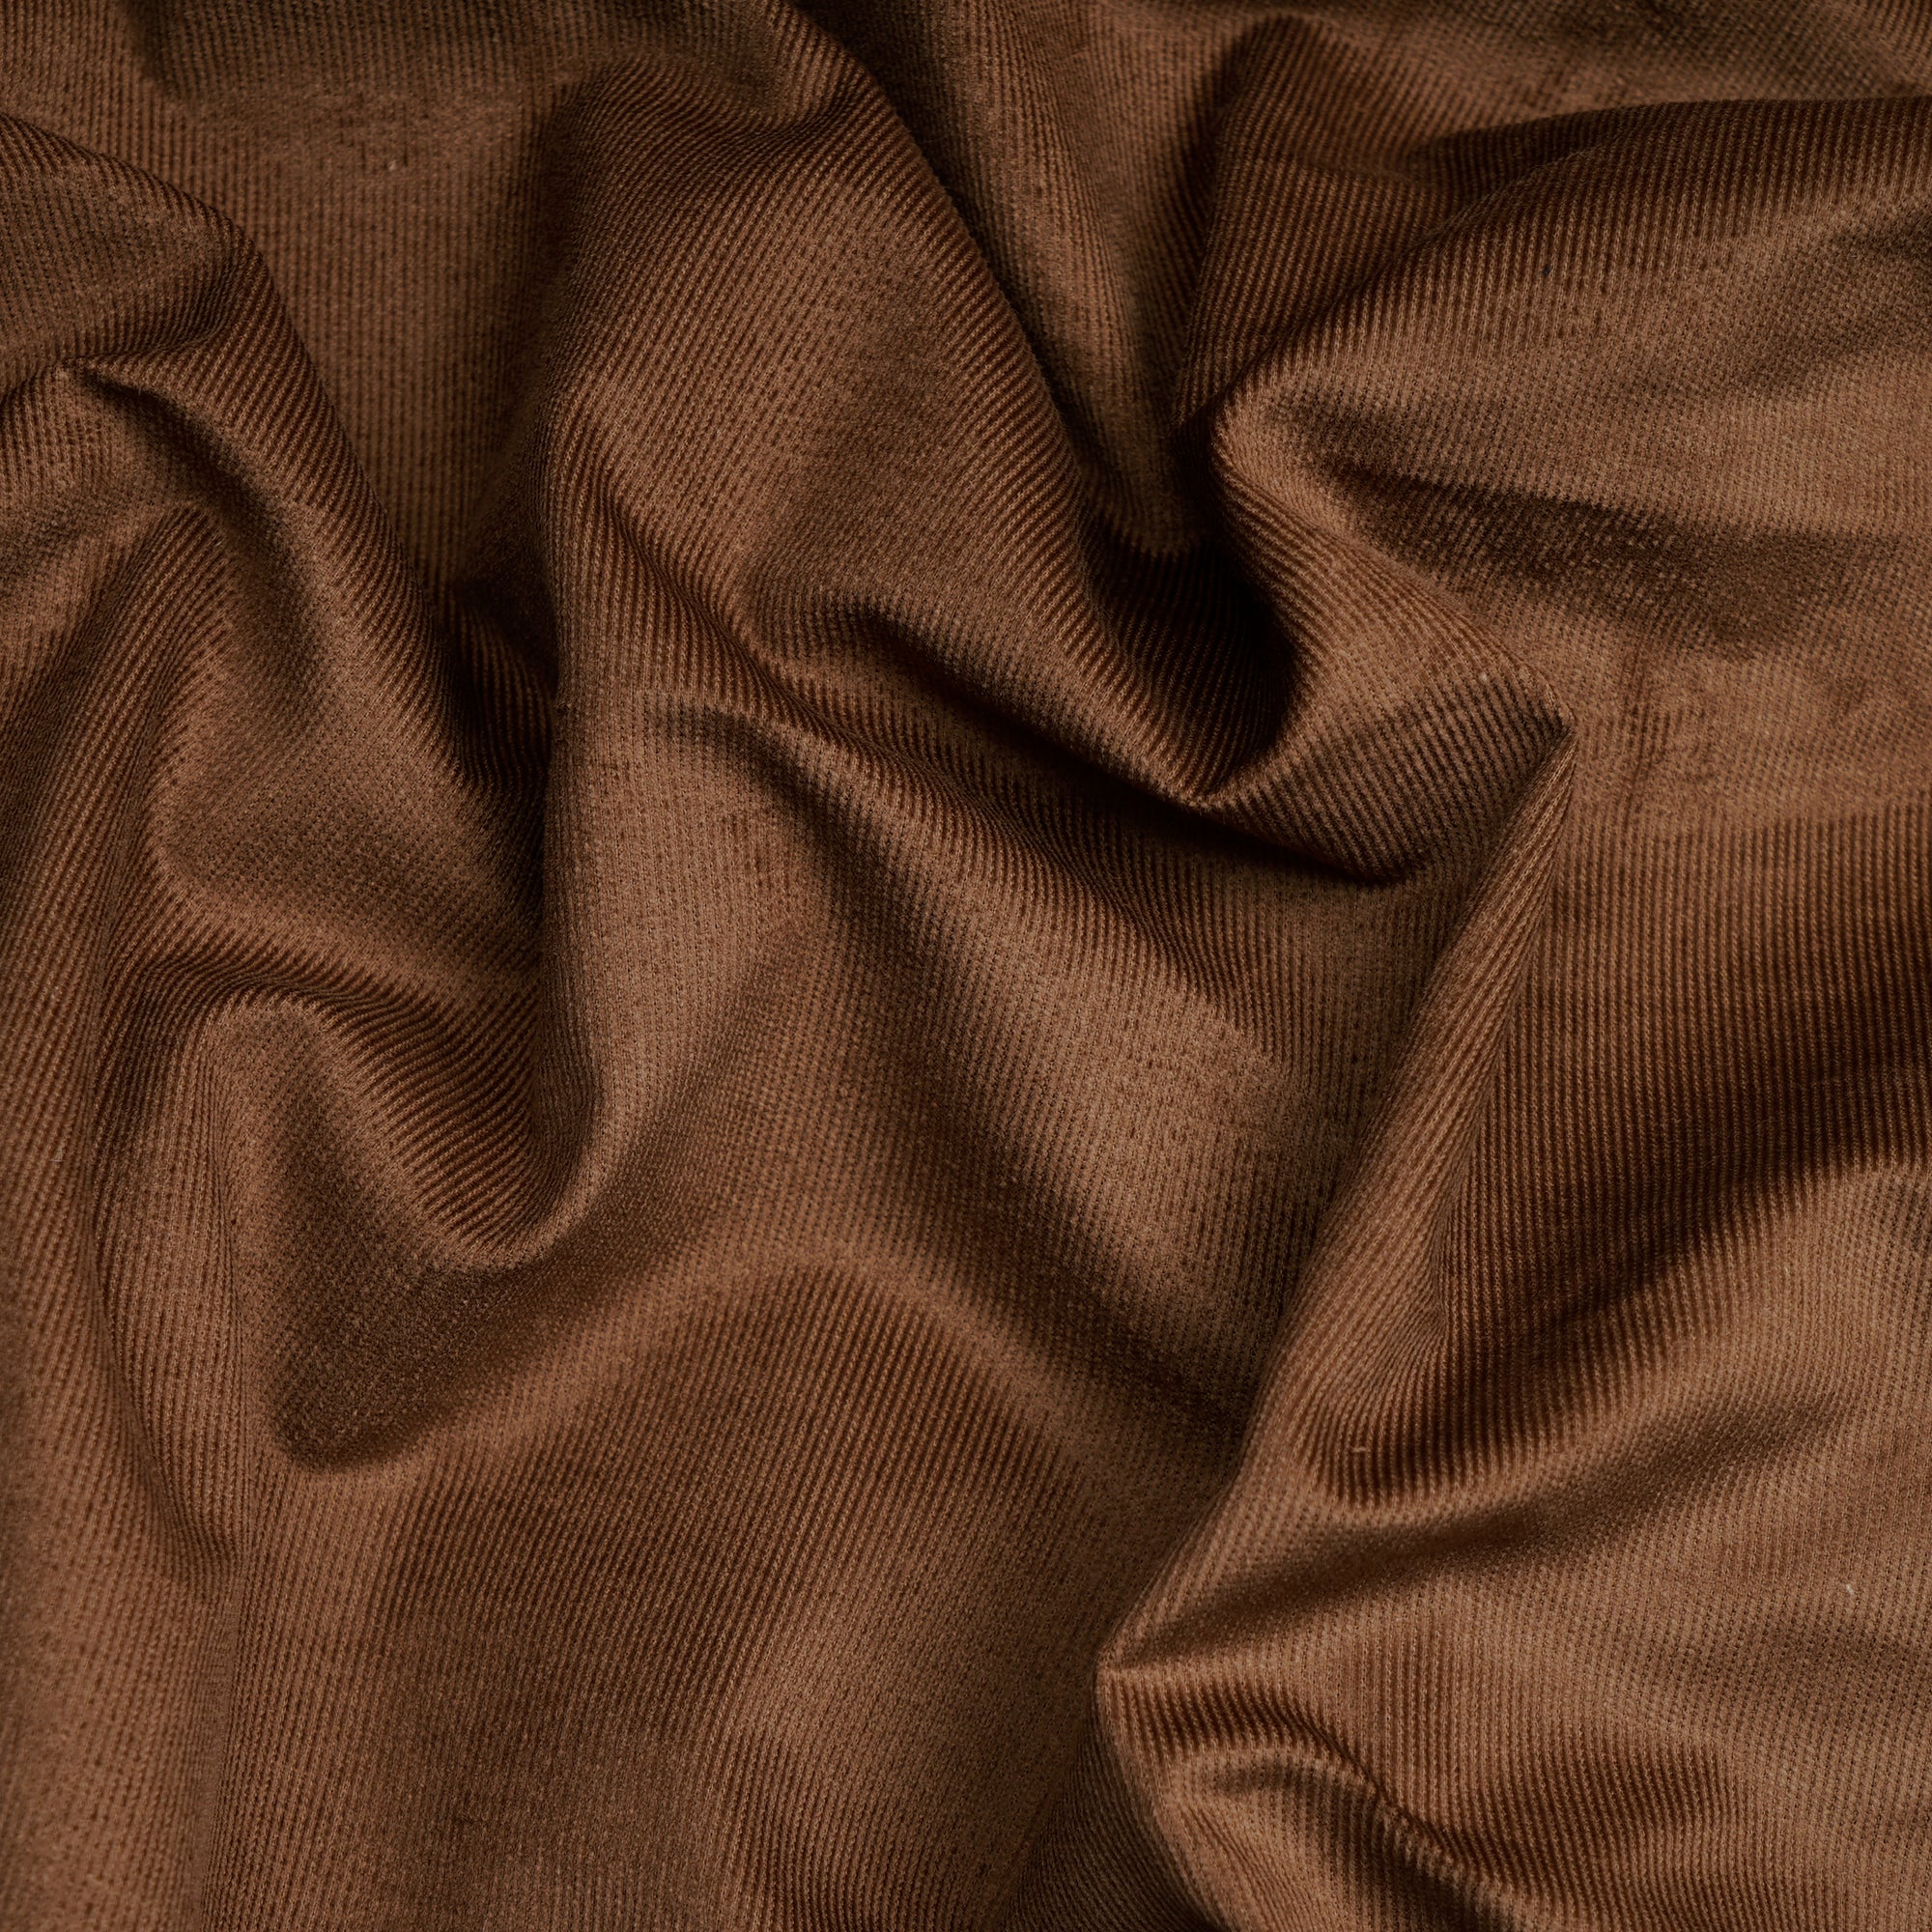 Coca Mocha Imported Shirting Weight Cotton Corduroy Fabric (58" Width)